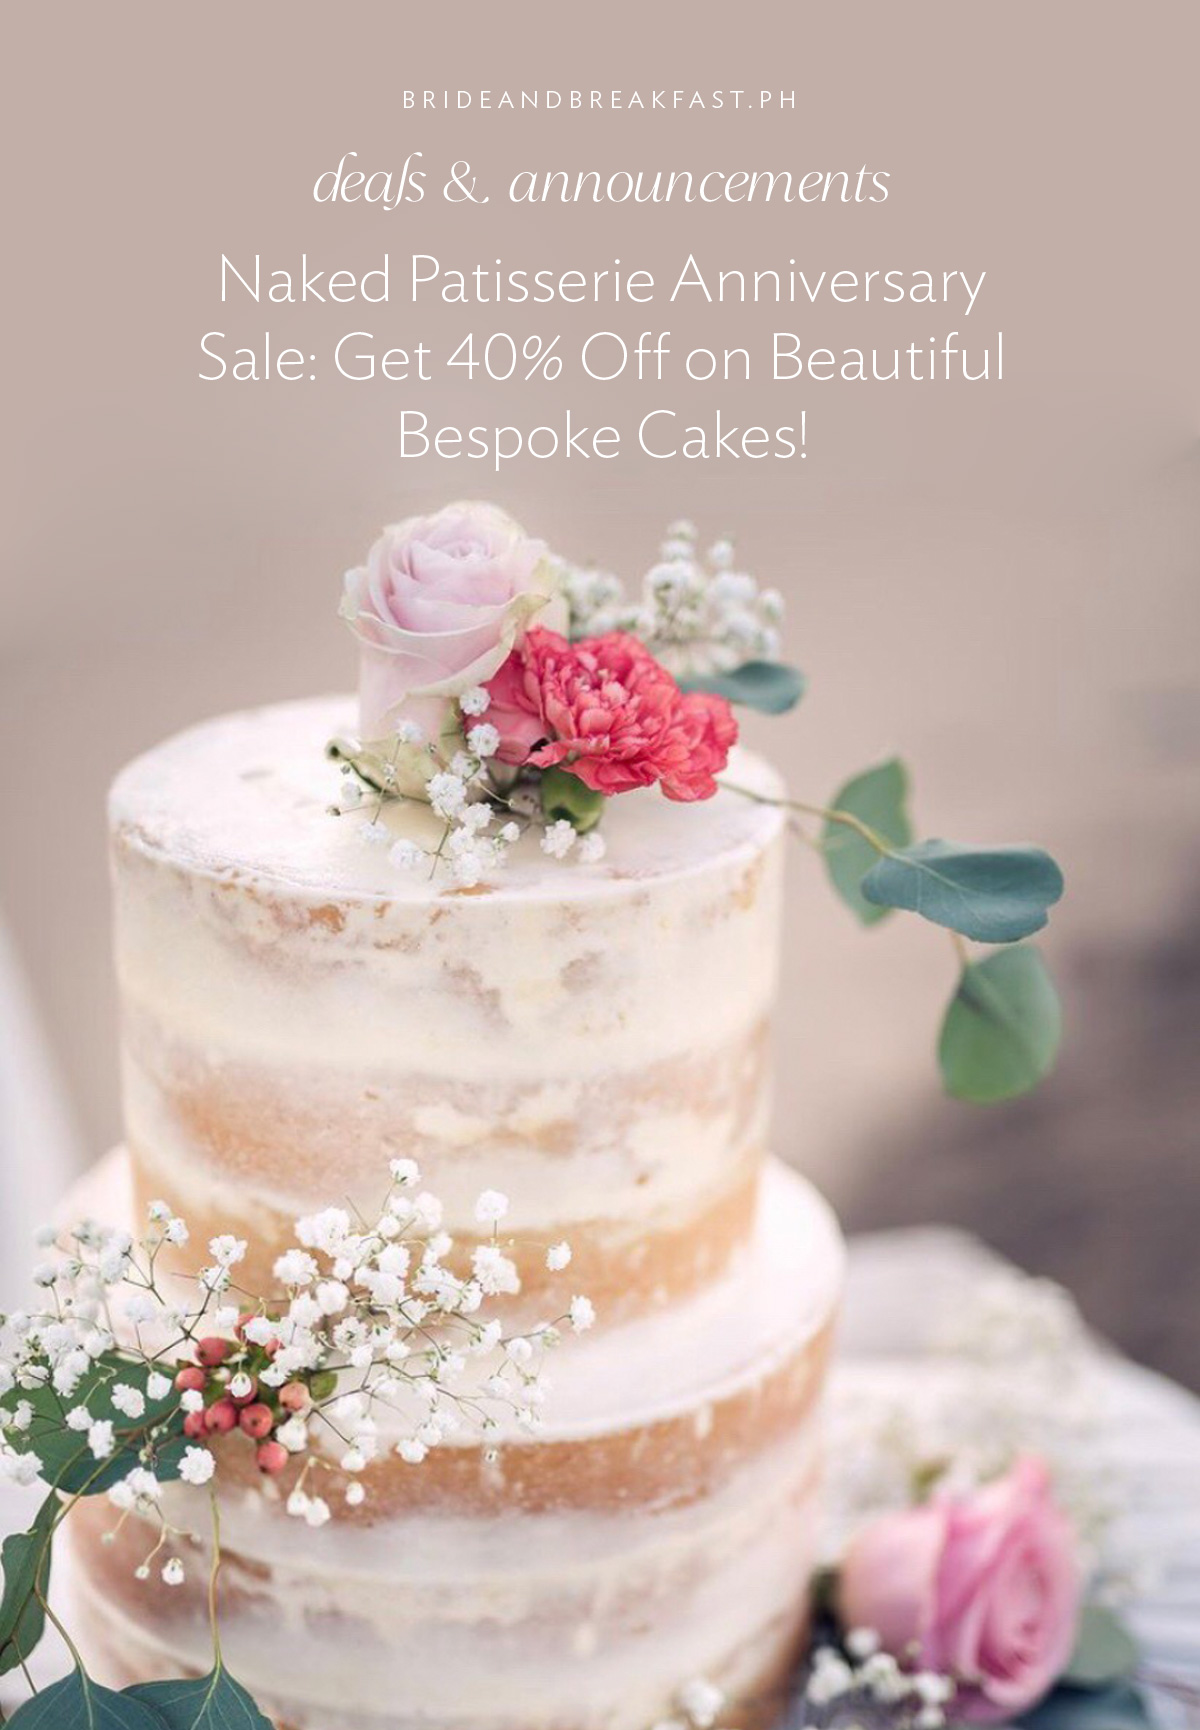 Naked Patisserie Anniversary Sale: Get 40% Off on Beautiful Bespoke Cakes!